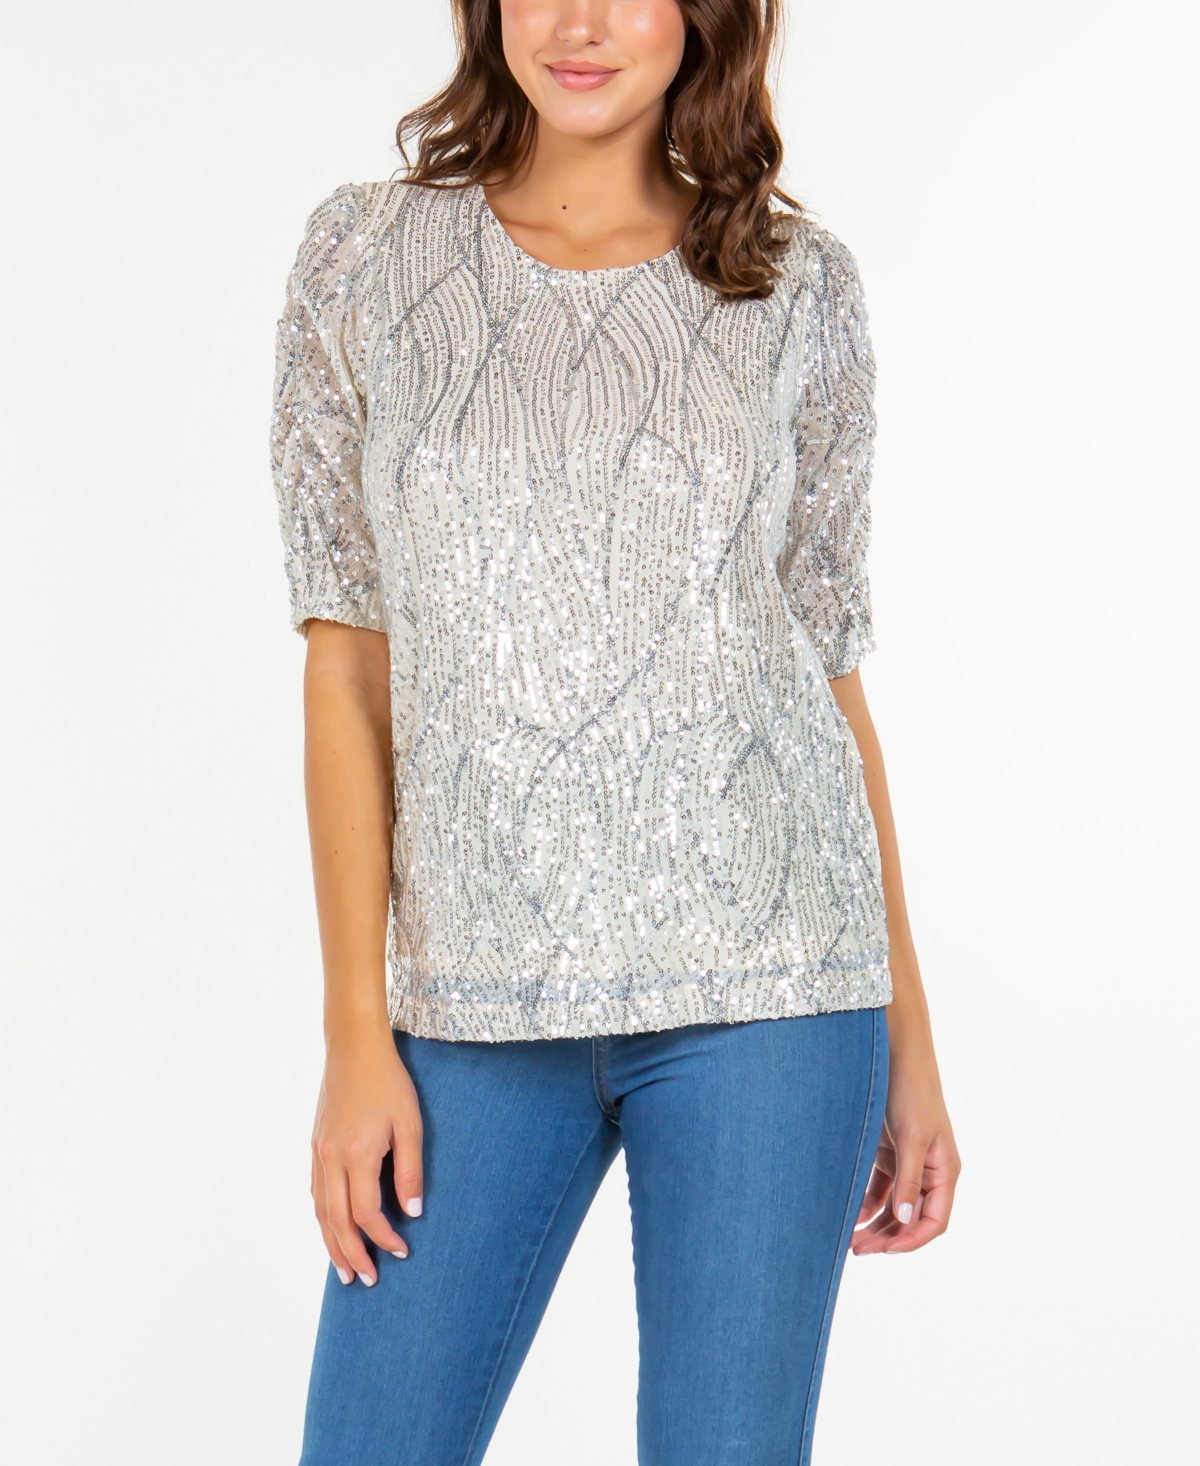 Fever Women's Rouched Short Sleeve Sequin Top